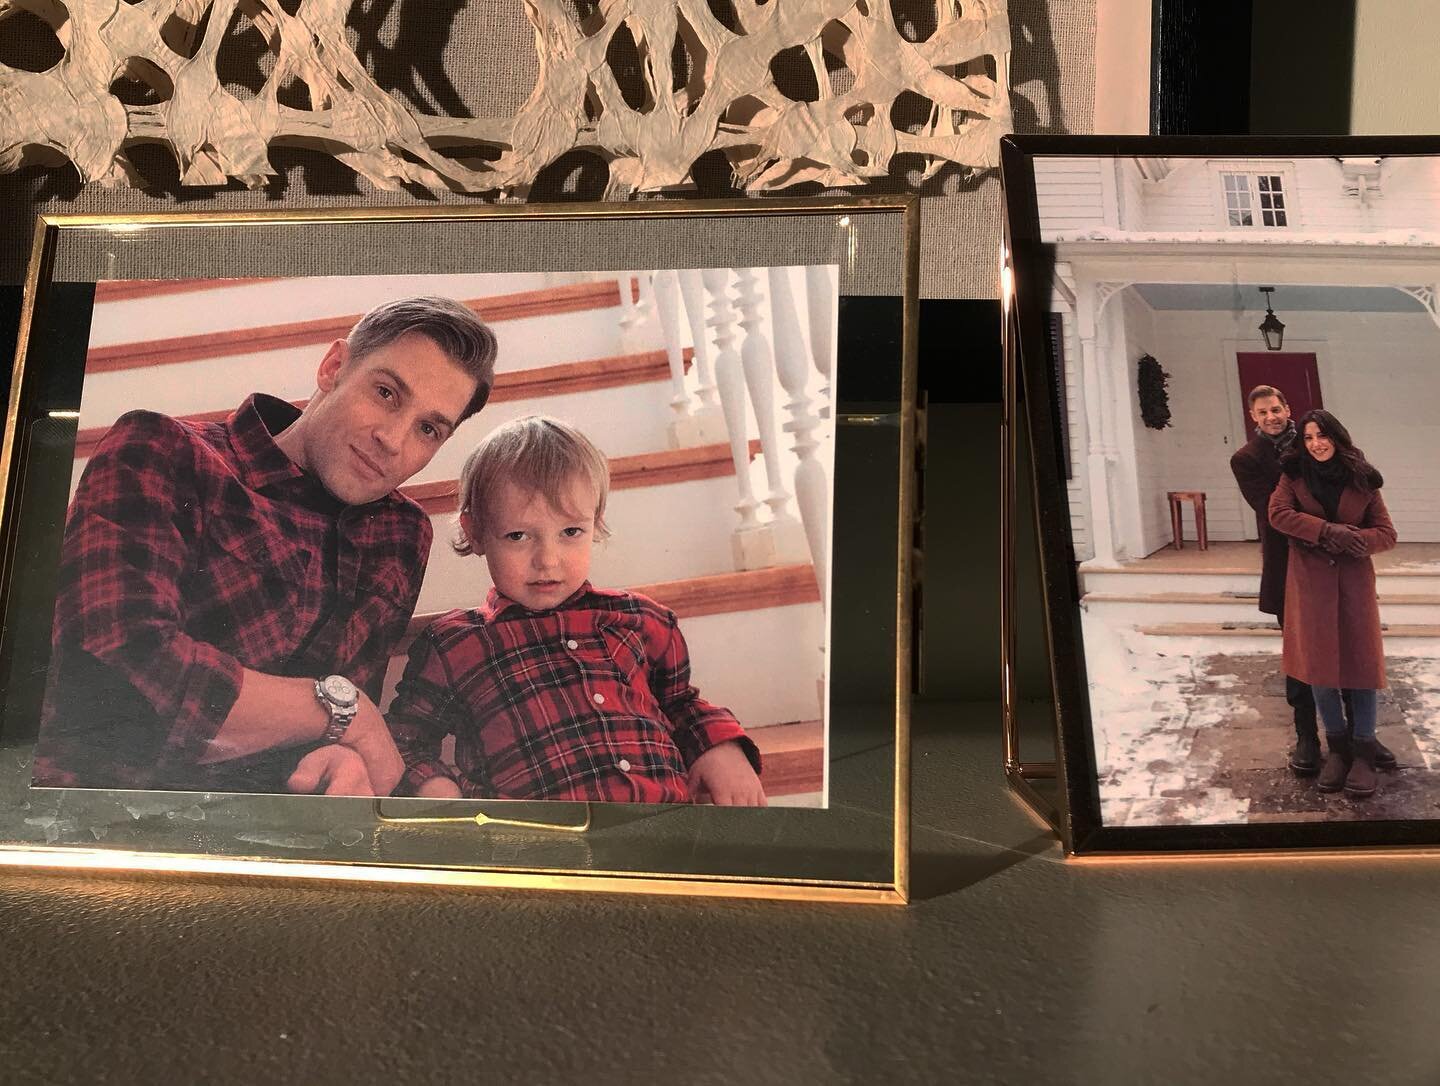 The details that go into creating a set are astounding. All throughout the Connelly house are photos. Some were taken (with permission of course) from my Facebook page of our family and some were staged. Our first days on set were photoshoot days to 